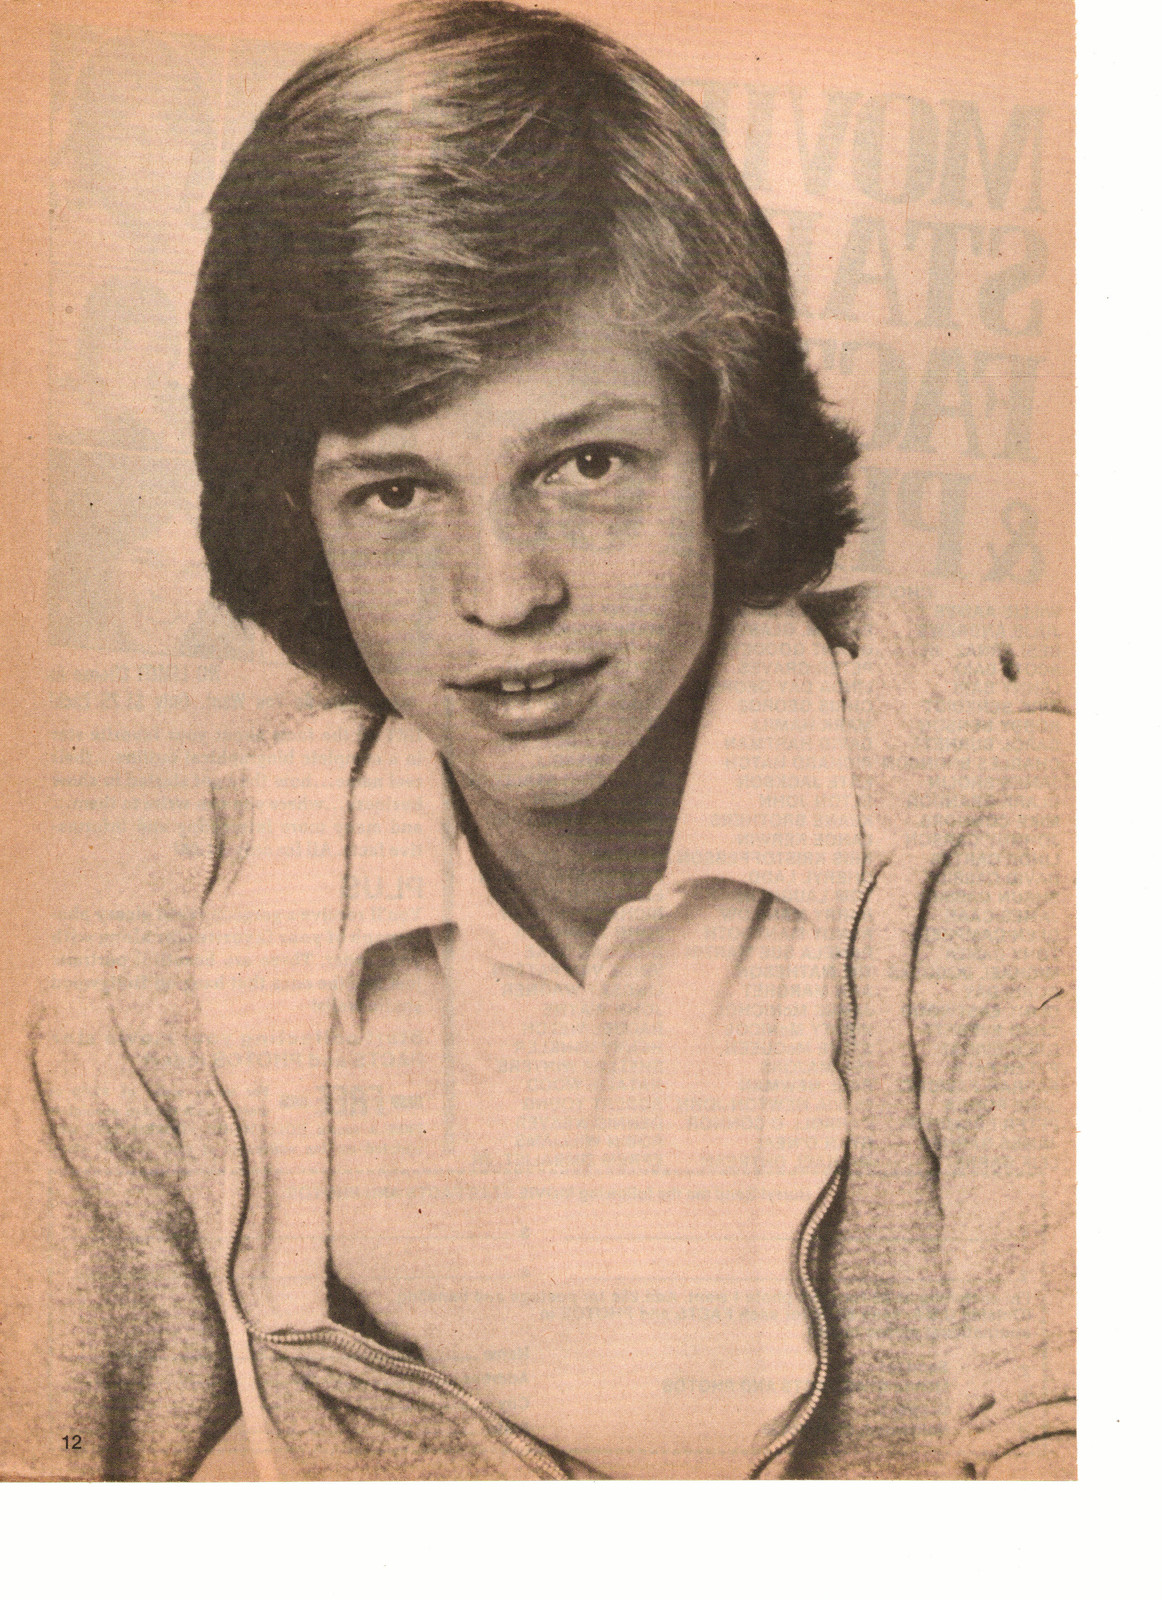 Jimmy Mcnichol Teen Magazine Pinup Clipping Black And White Adorable